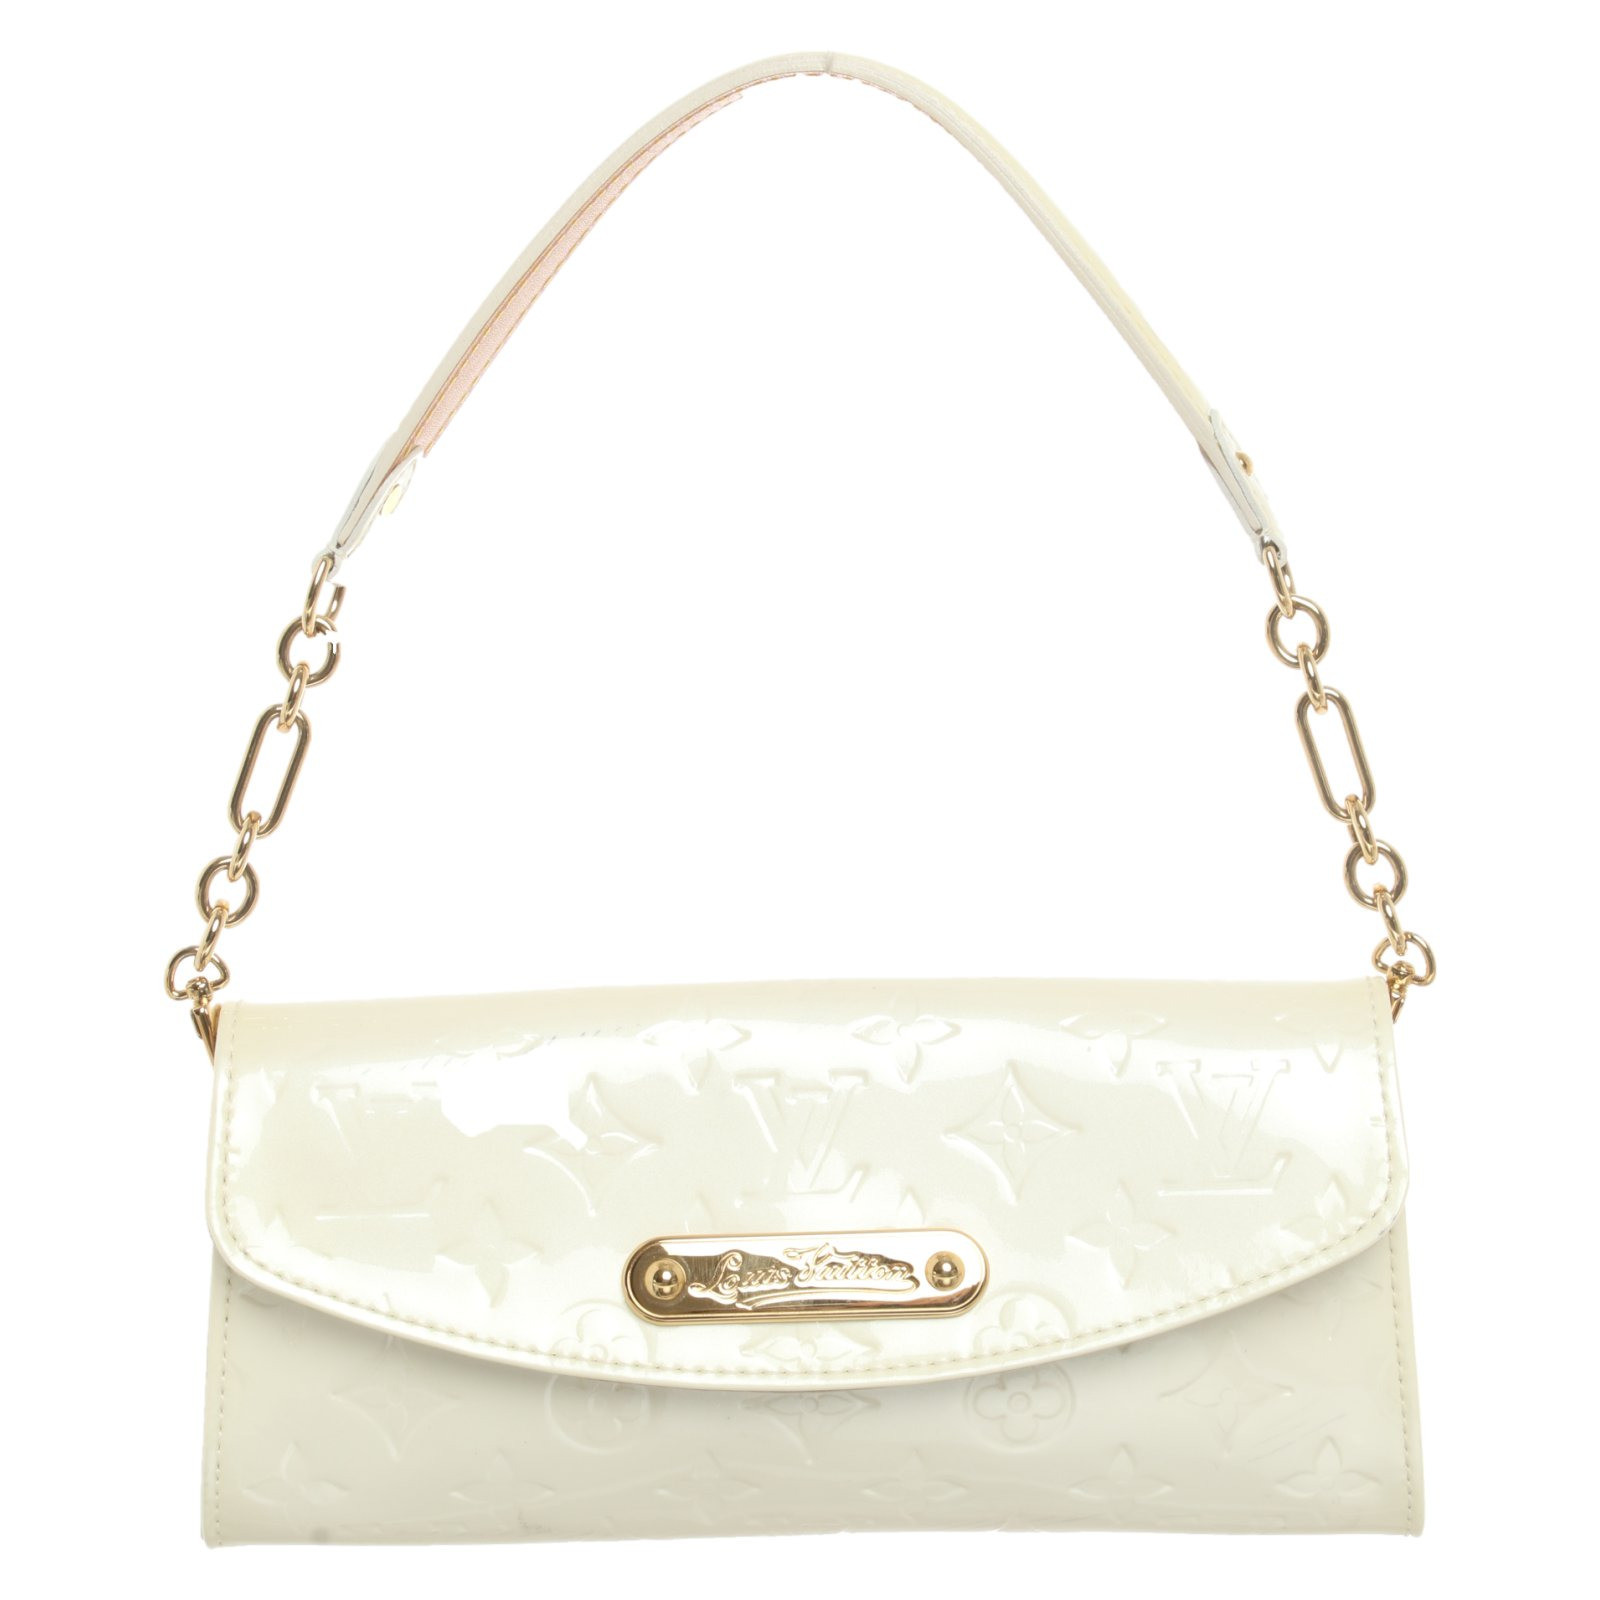 Louis Vuitton Clutch Bag leather in Cream - Second Hand Louis Vuitton Clutch Bag Patent leather in Cream buy for 309€ (6141594)